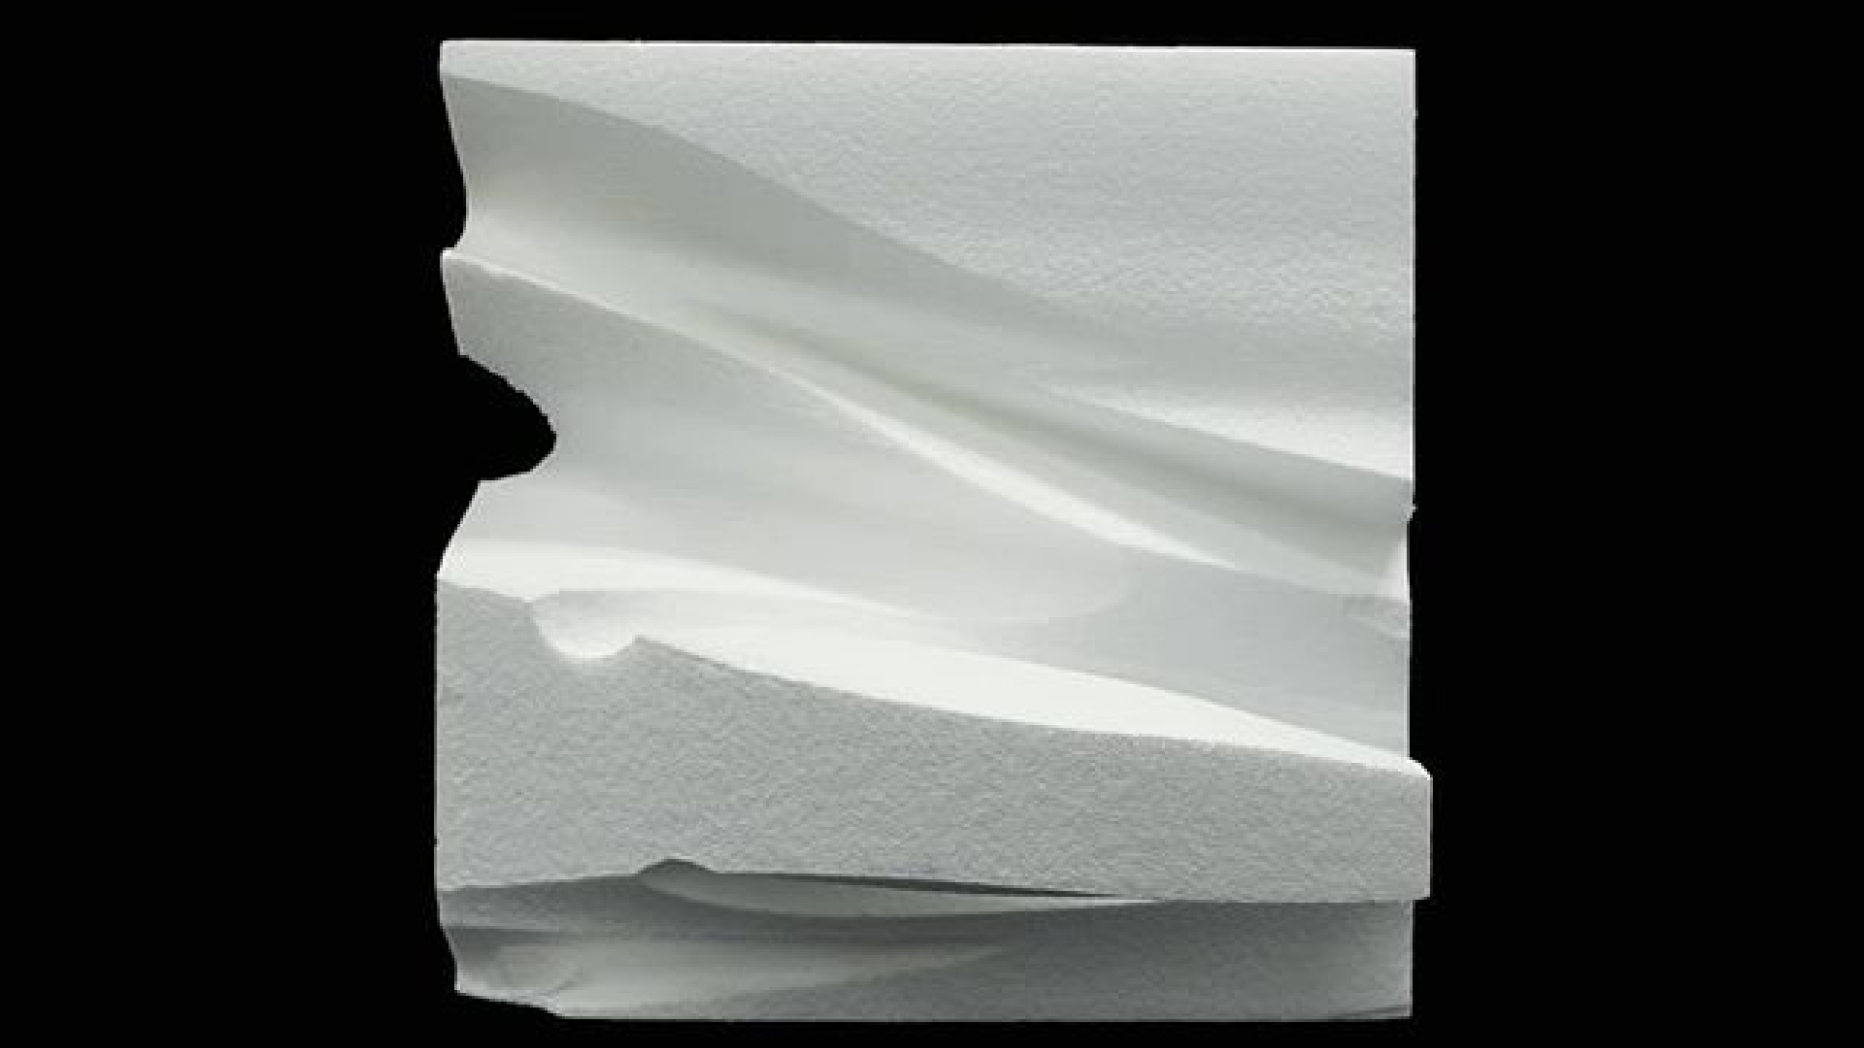 Abstract white block sculpture.